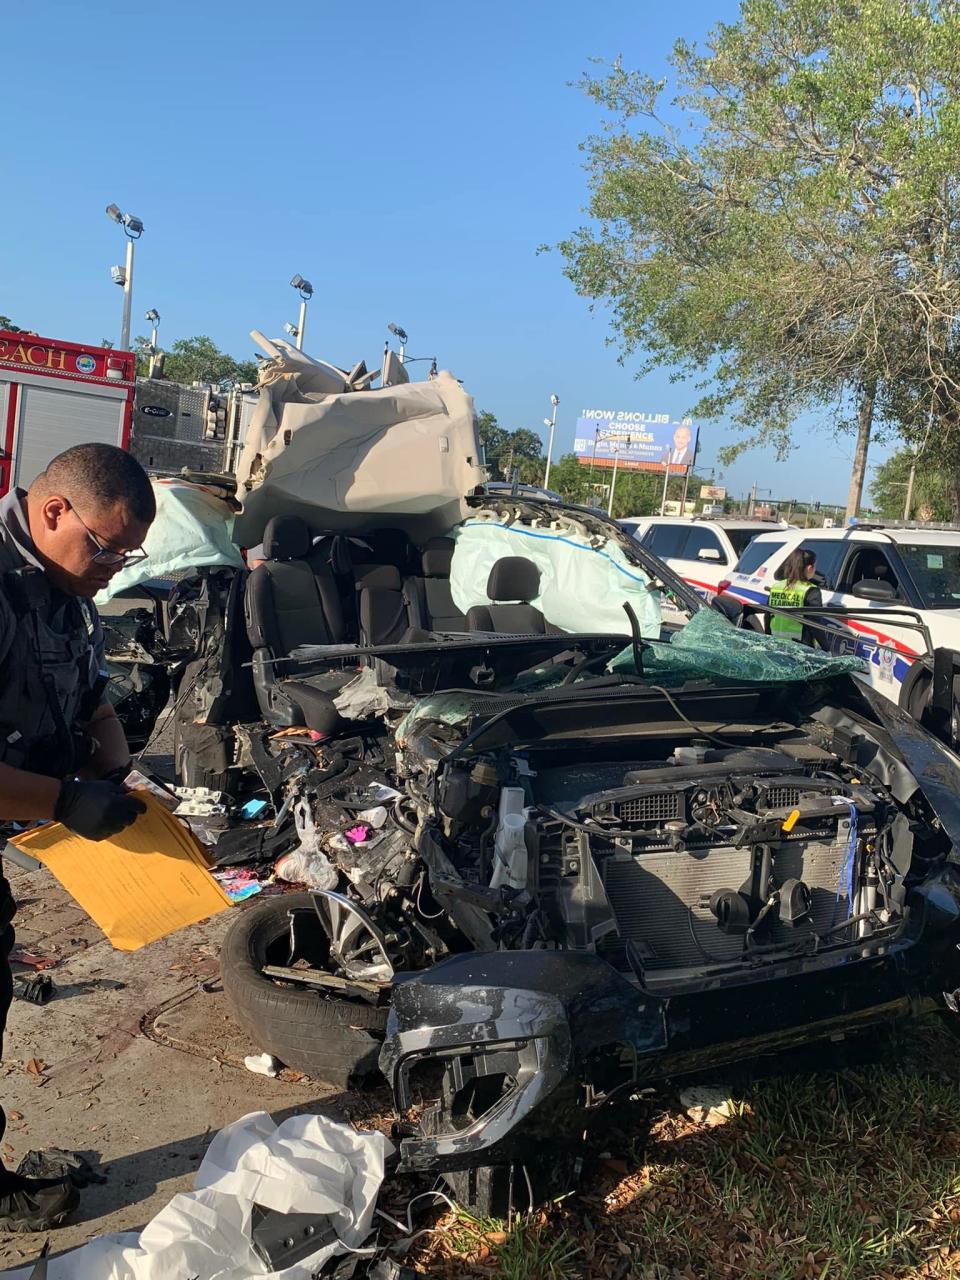 Three teenagers were killed in a wreck Saturday morning, April 1, on International Speedway Boulevard, police reported.